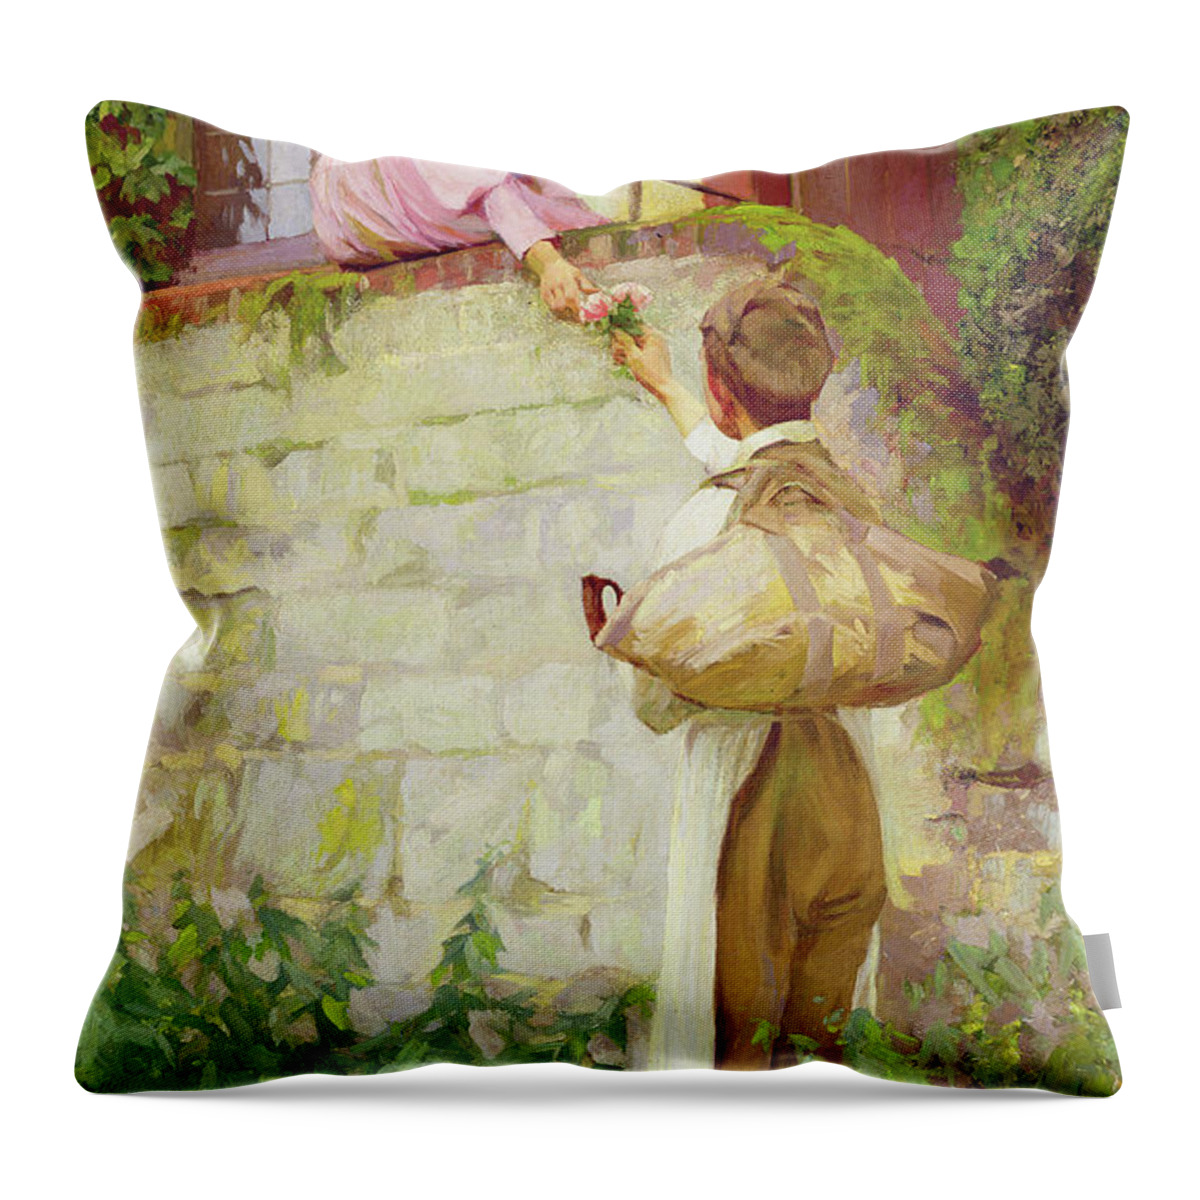 Lover Throw Pillow featuring the painting June Roses by Gunning King